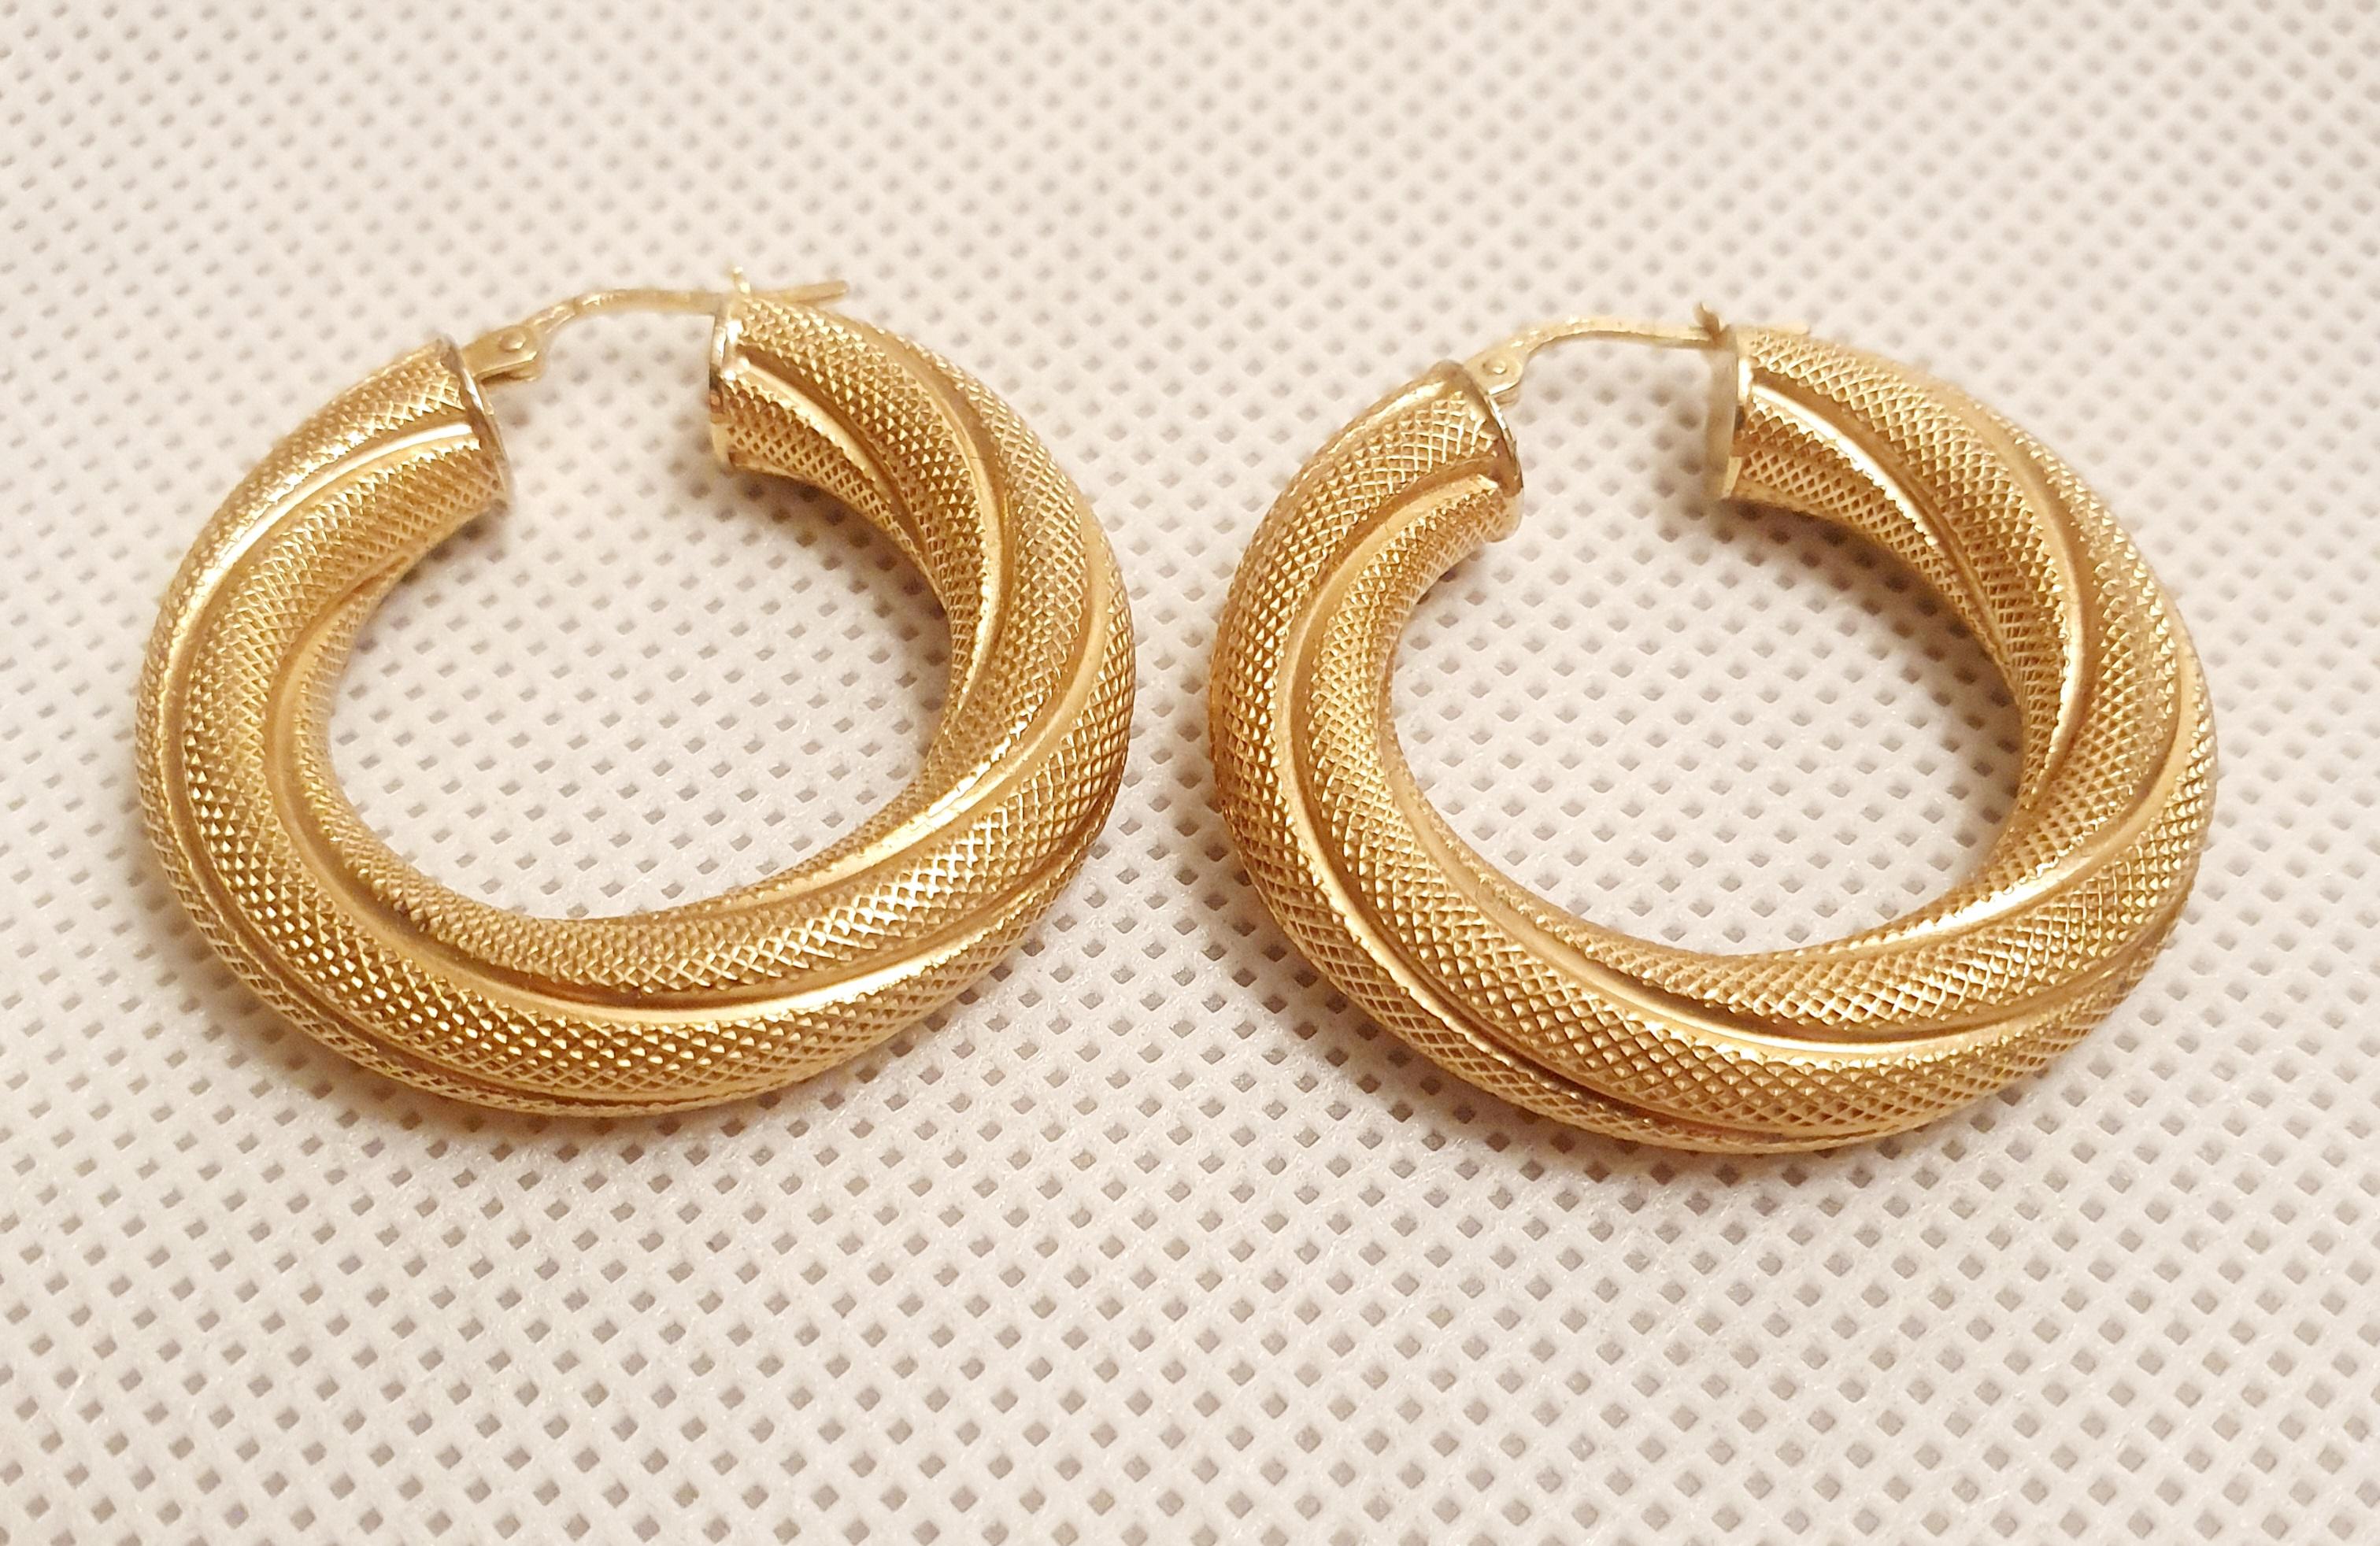 Pair of 9ct Gold Earrings, weight 6.12g